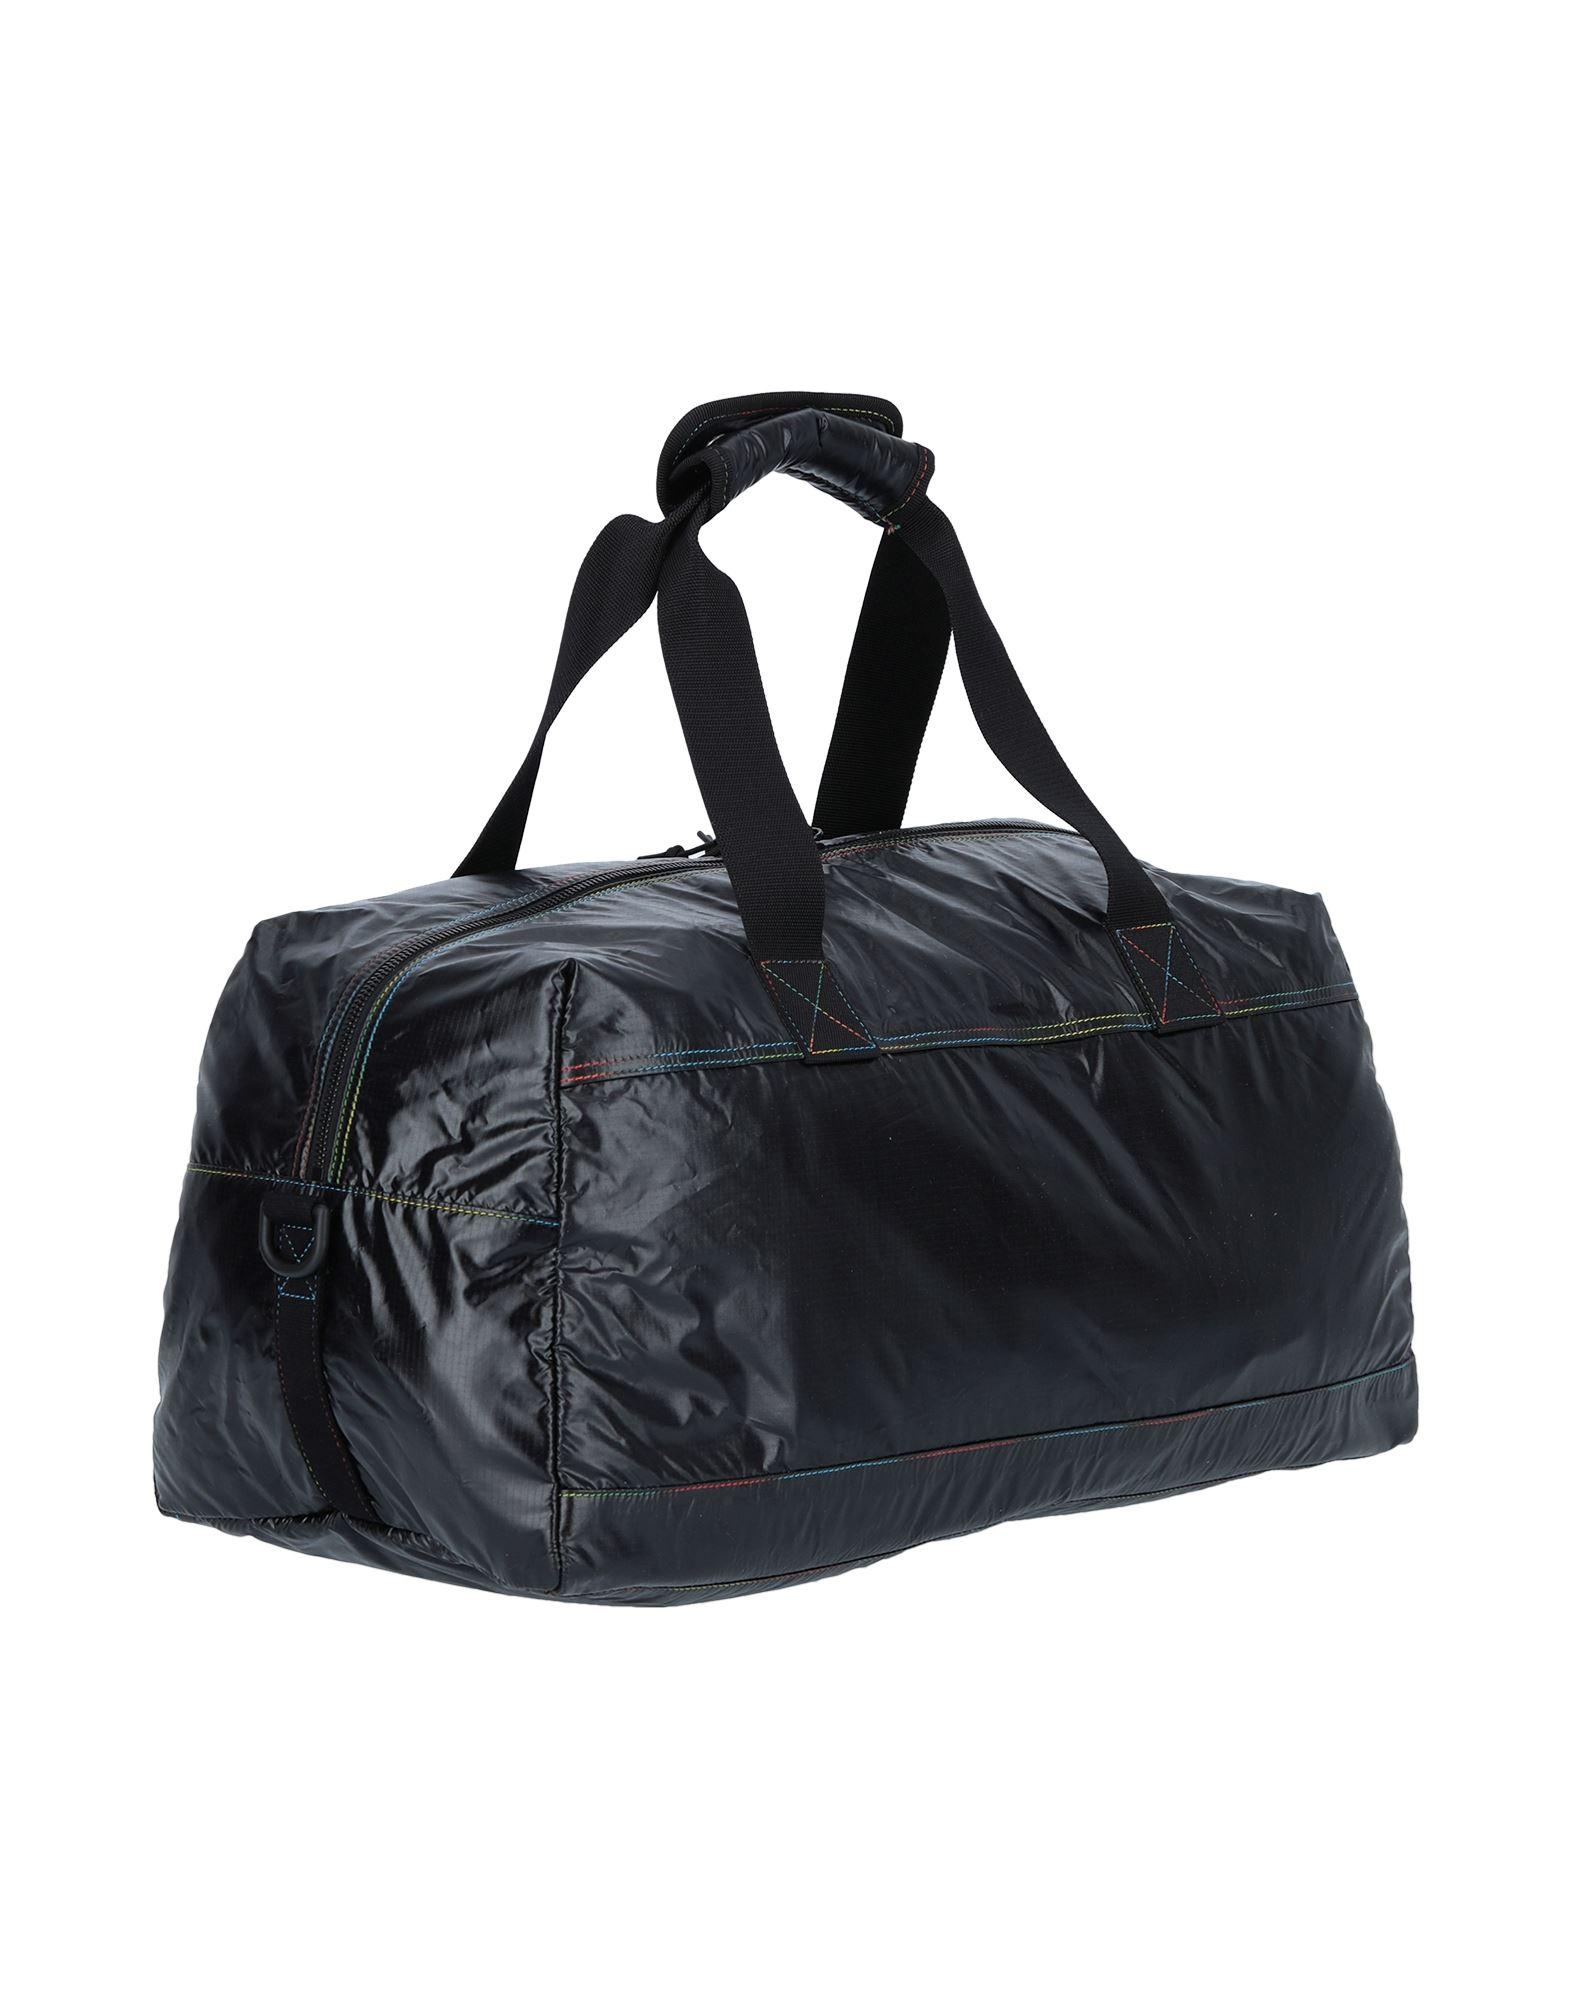 Saint Laurent Synthetic Nuxx Duffle Bag in Black for Men Save 33% Mens Bags Gym bags and sports bags 